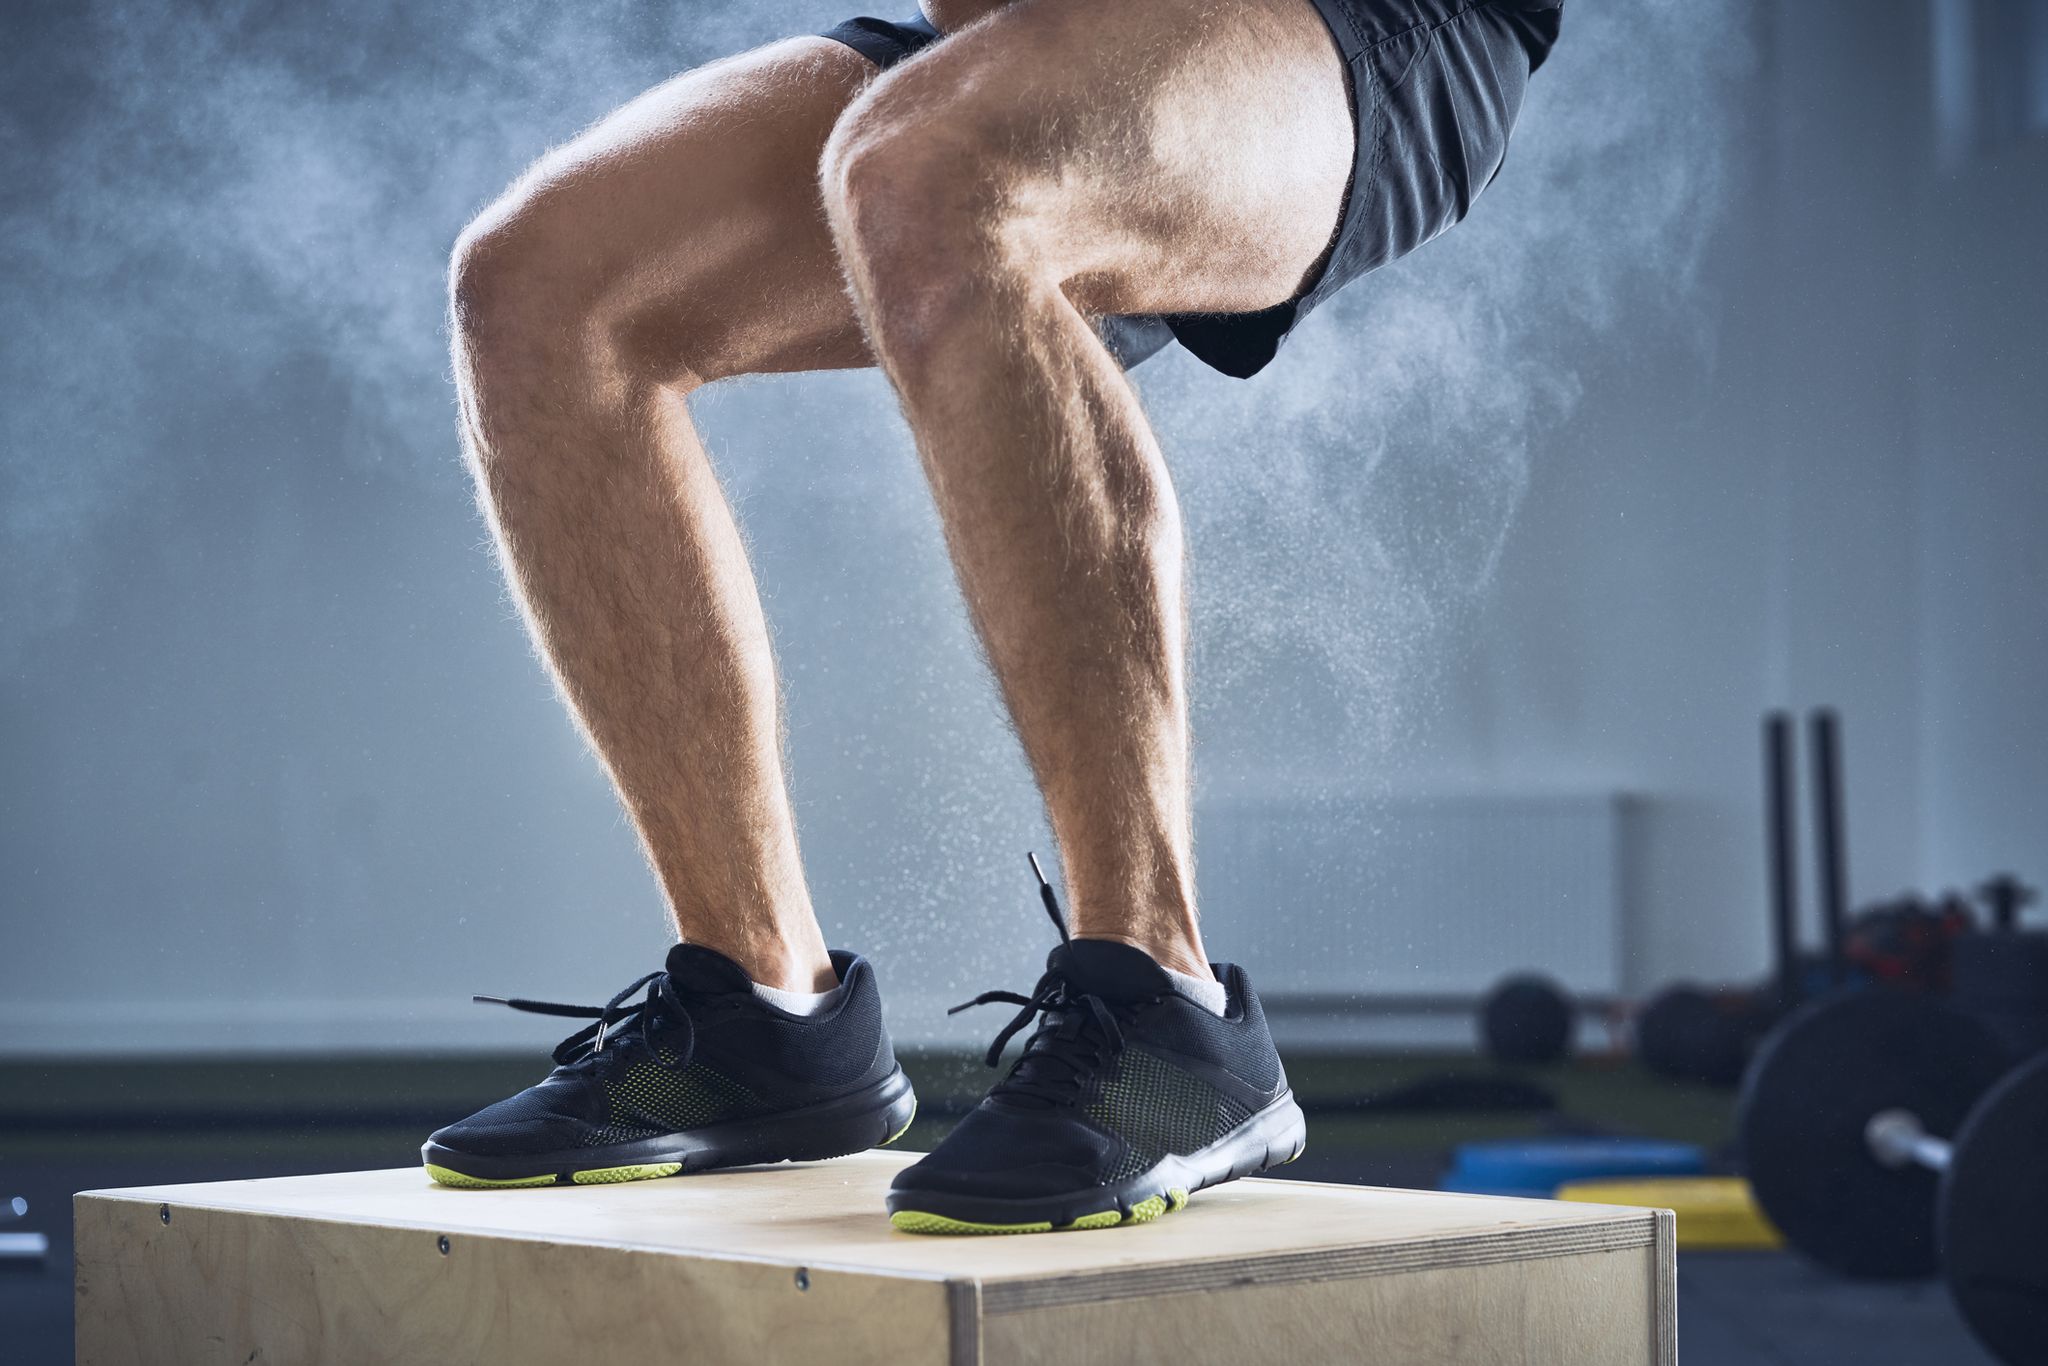 The Best Home Leg Workout That Builds Seriously Strong Legs